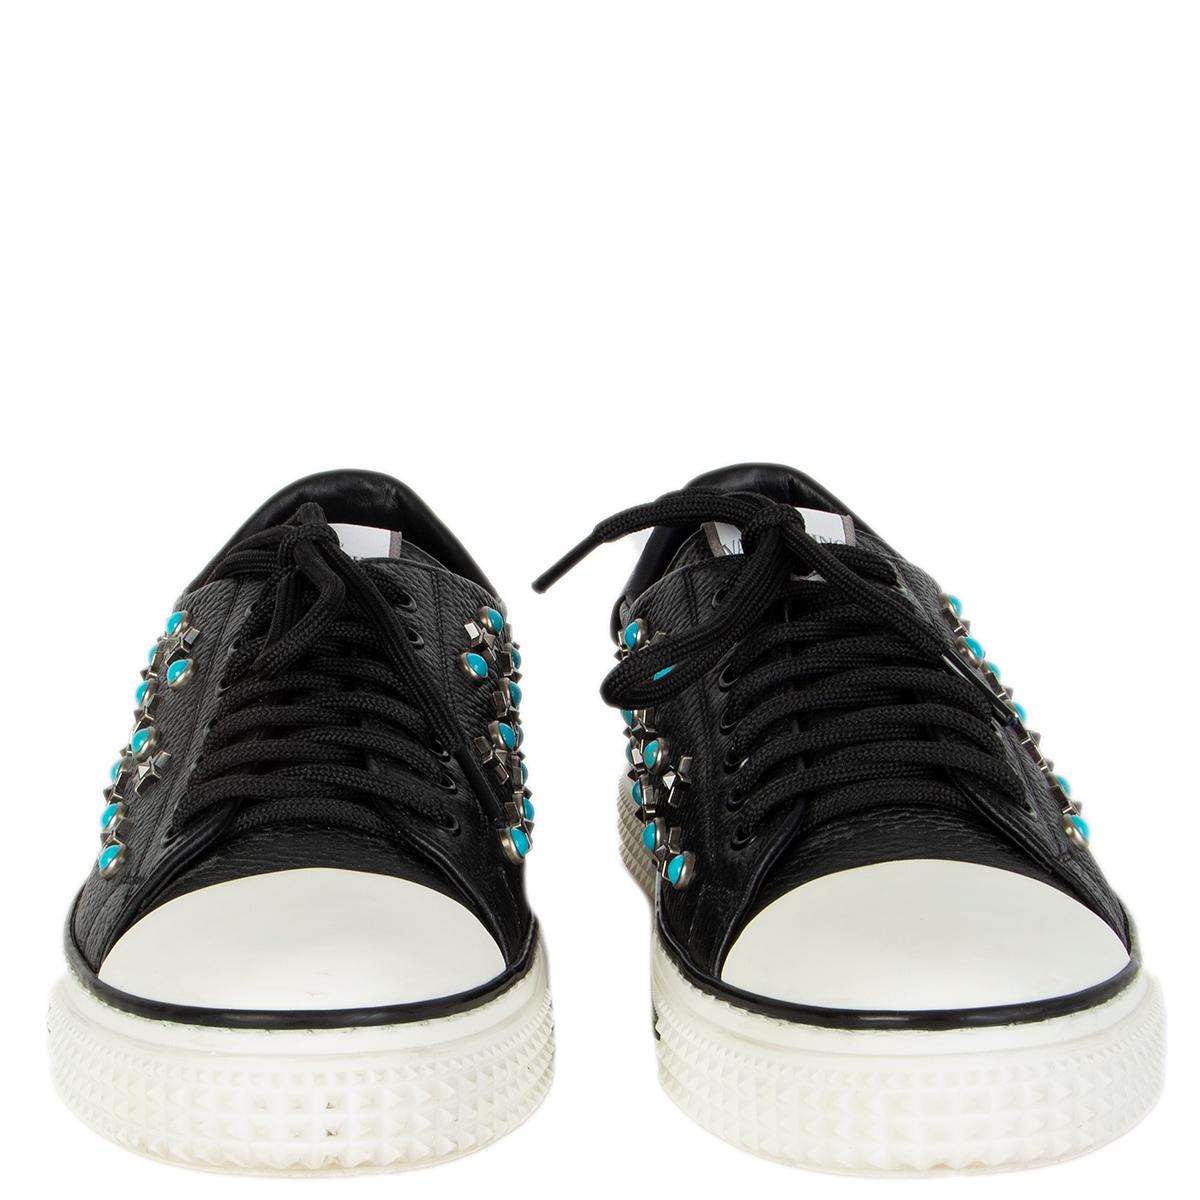 100% authentic  Valentino sneakers in black grained leather studded with metal stars and turquoise stones. White rubber sole and tip. Have been worn and are in excellent condition. Come with dust bag. 

Measurements
Imprinted Size	41
Shoe